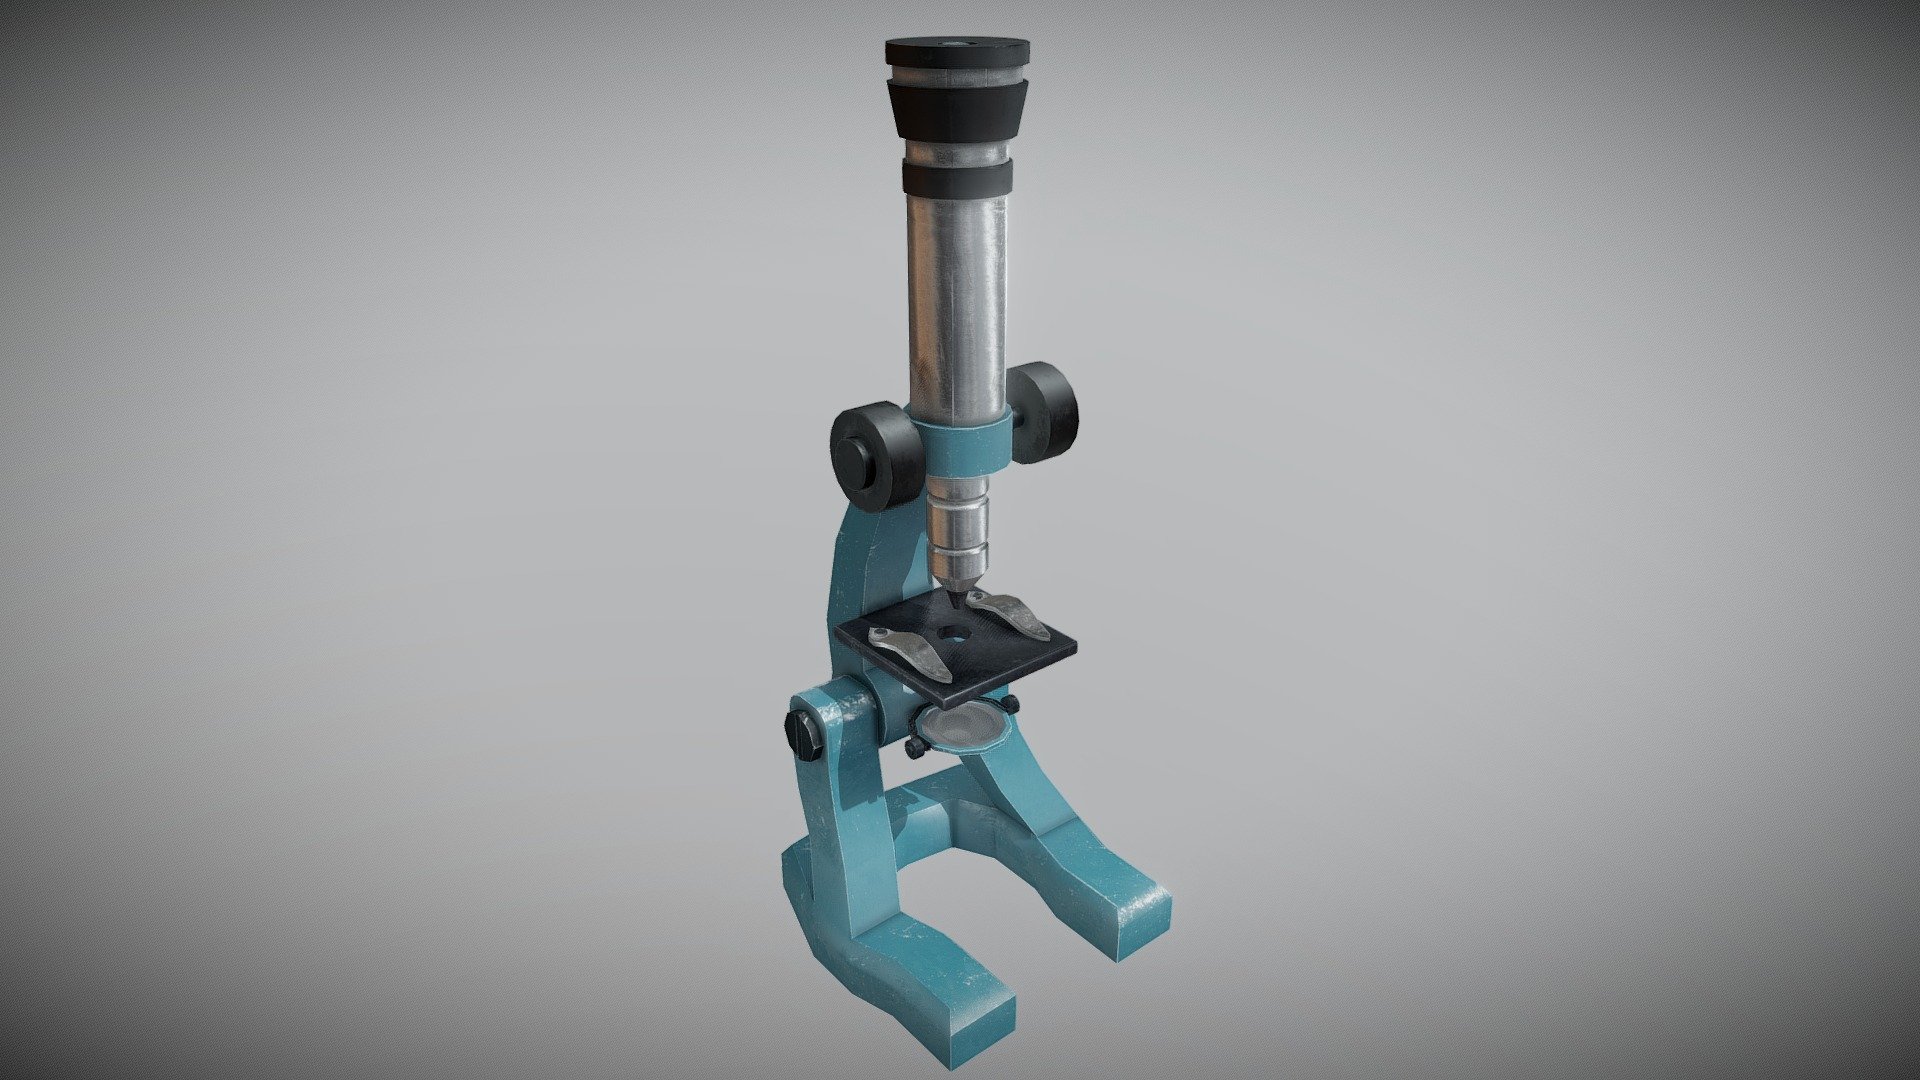 Old Microscope - December 14: search - Buy Royalty Free 3D model by Gulliver (@guillaumedingeon) 3d model